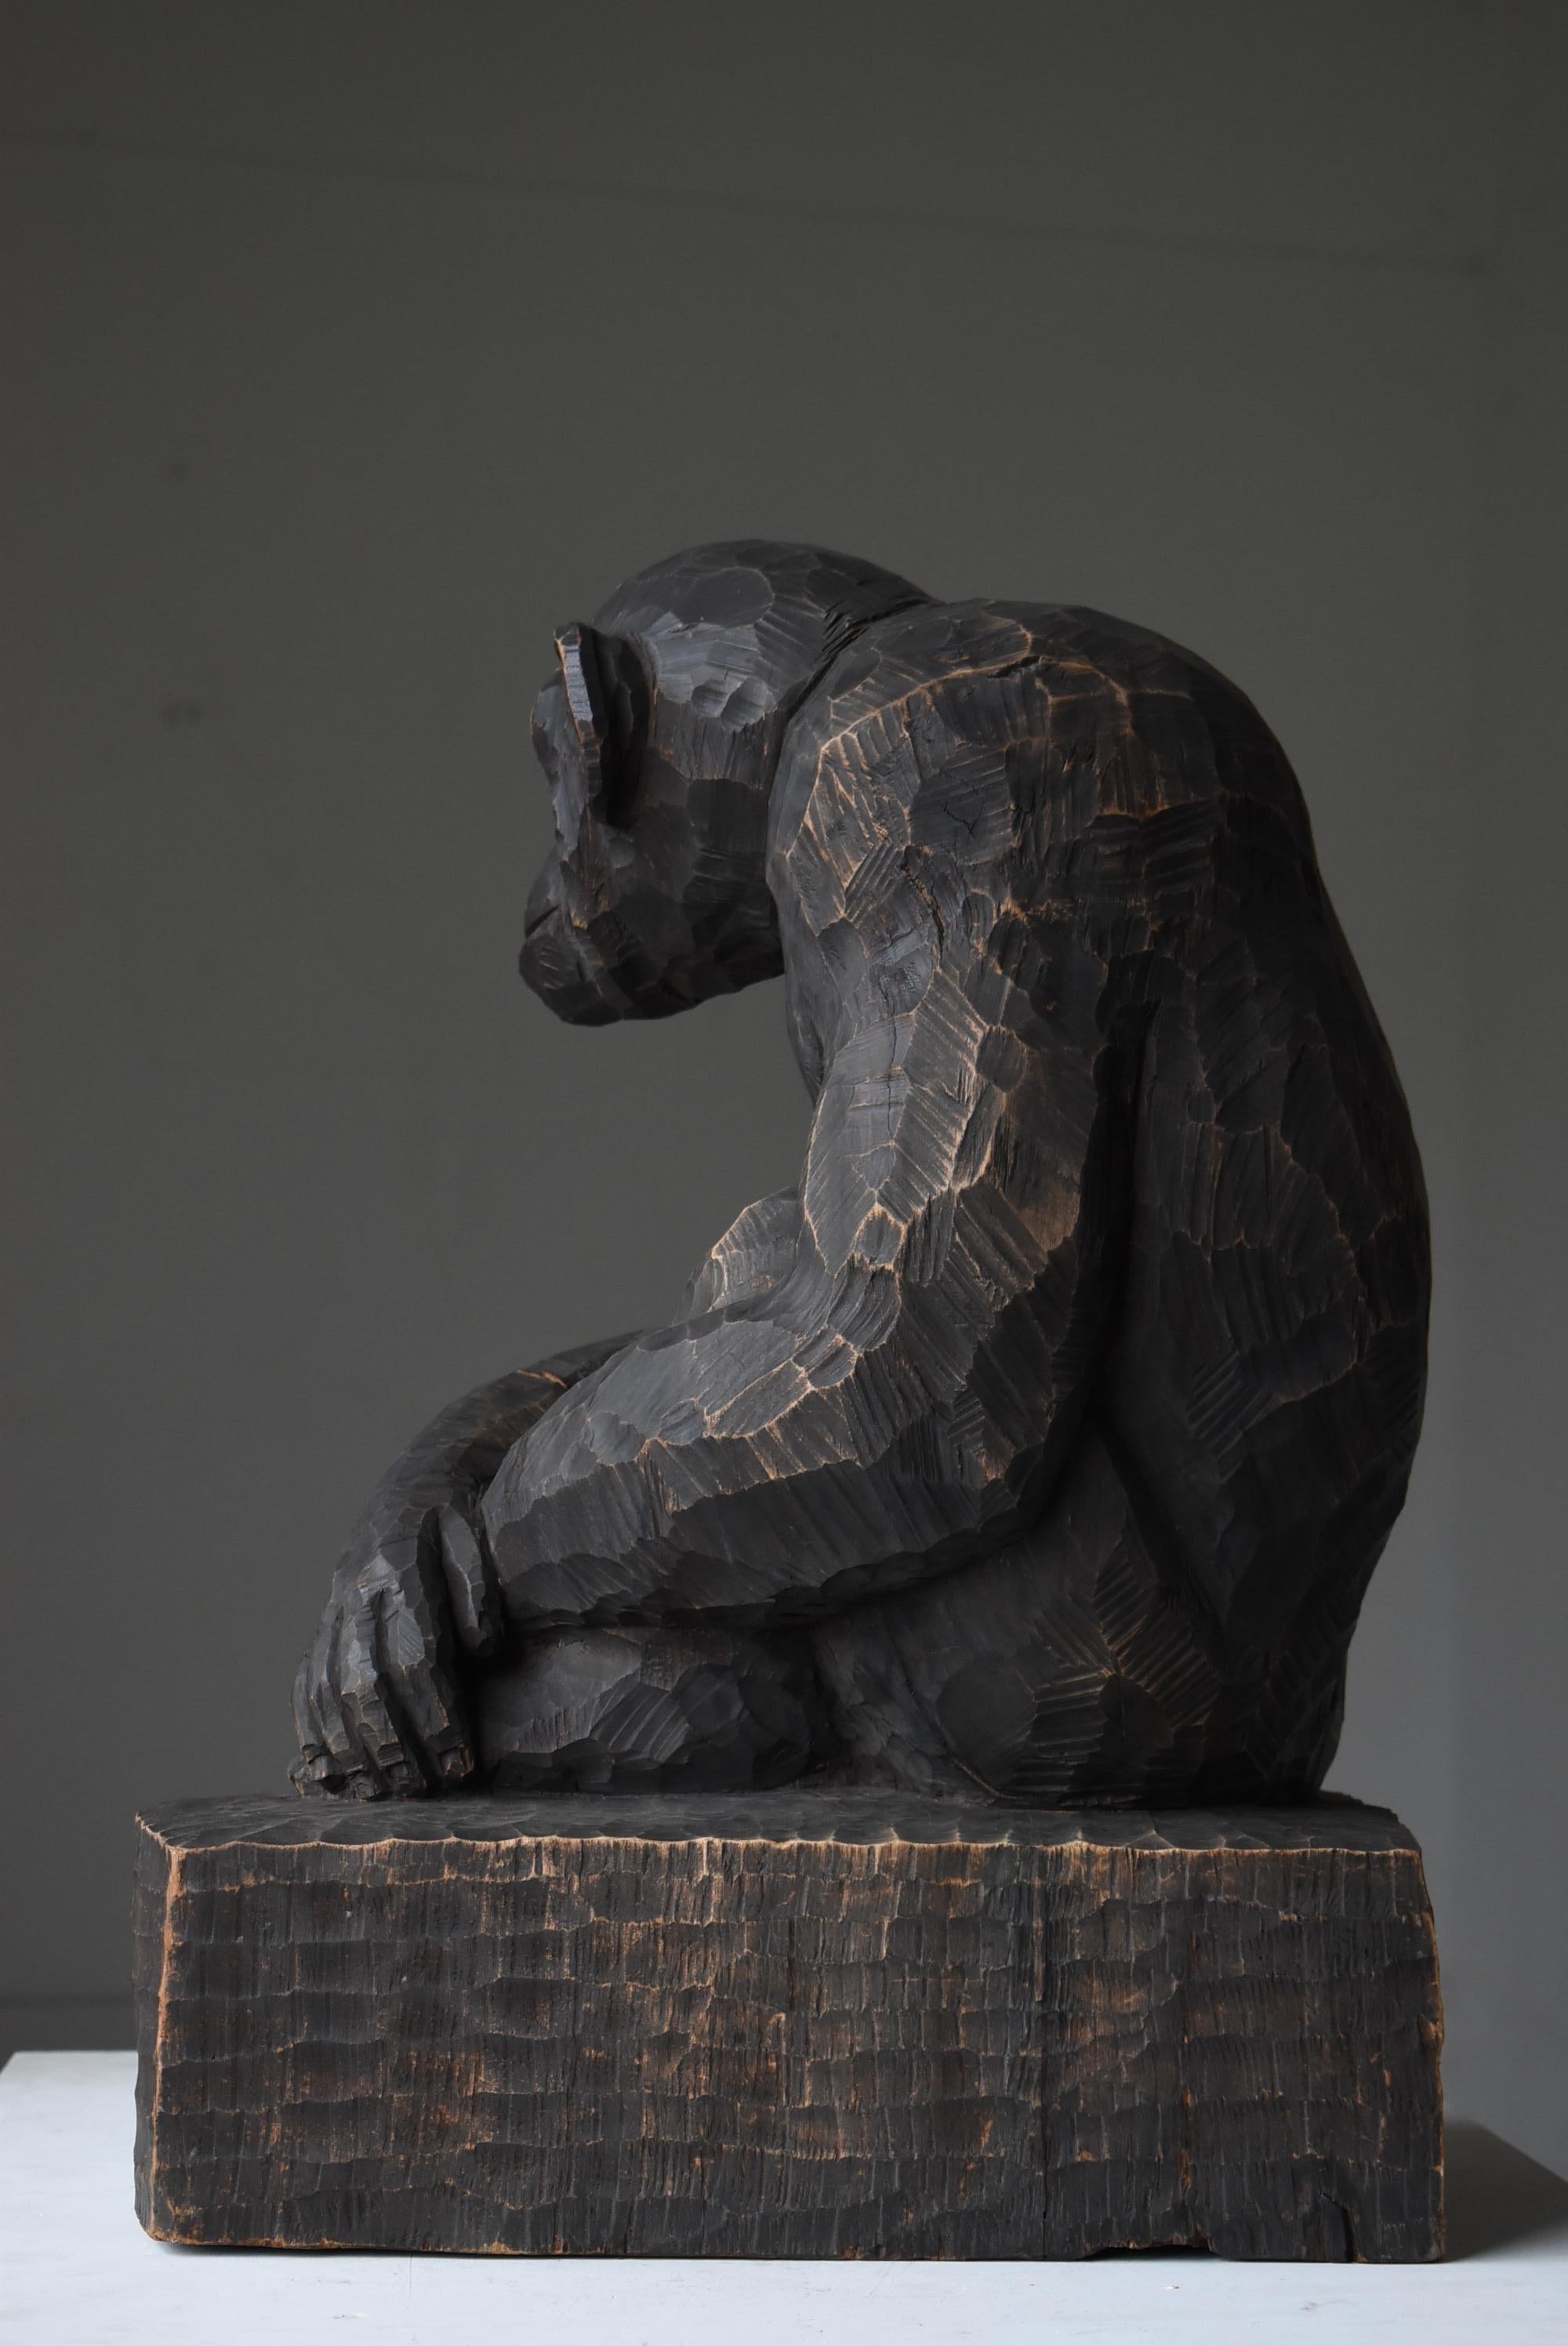 Japanese Old Wood Sculpture Chimpanzee 1940s-1960s / Wood Carving Mingei  For Sale 3